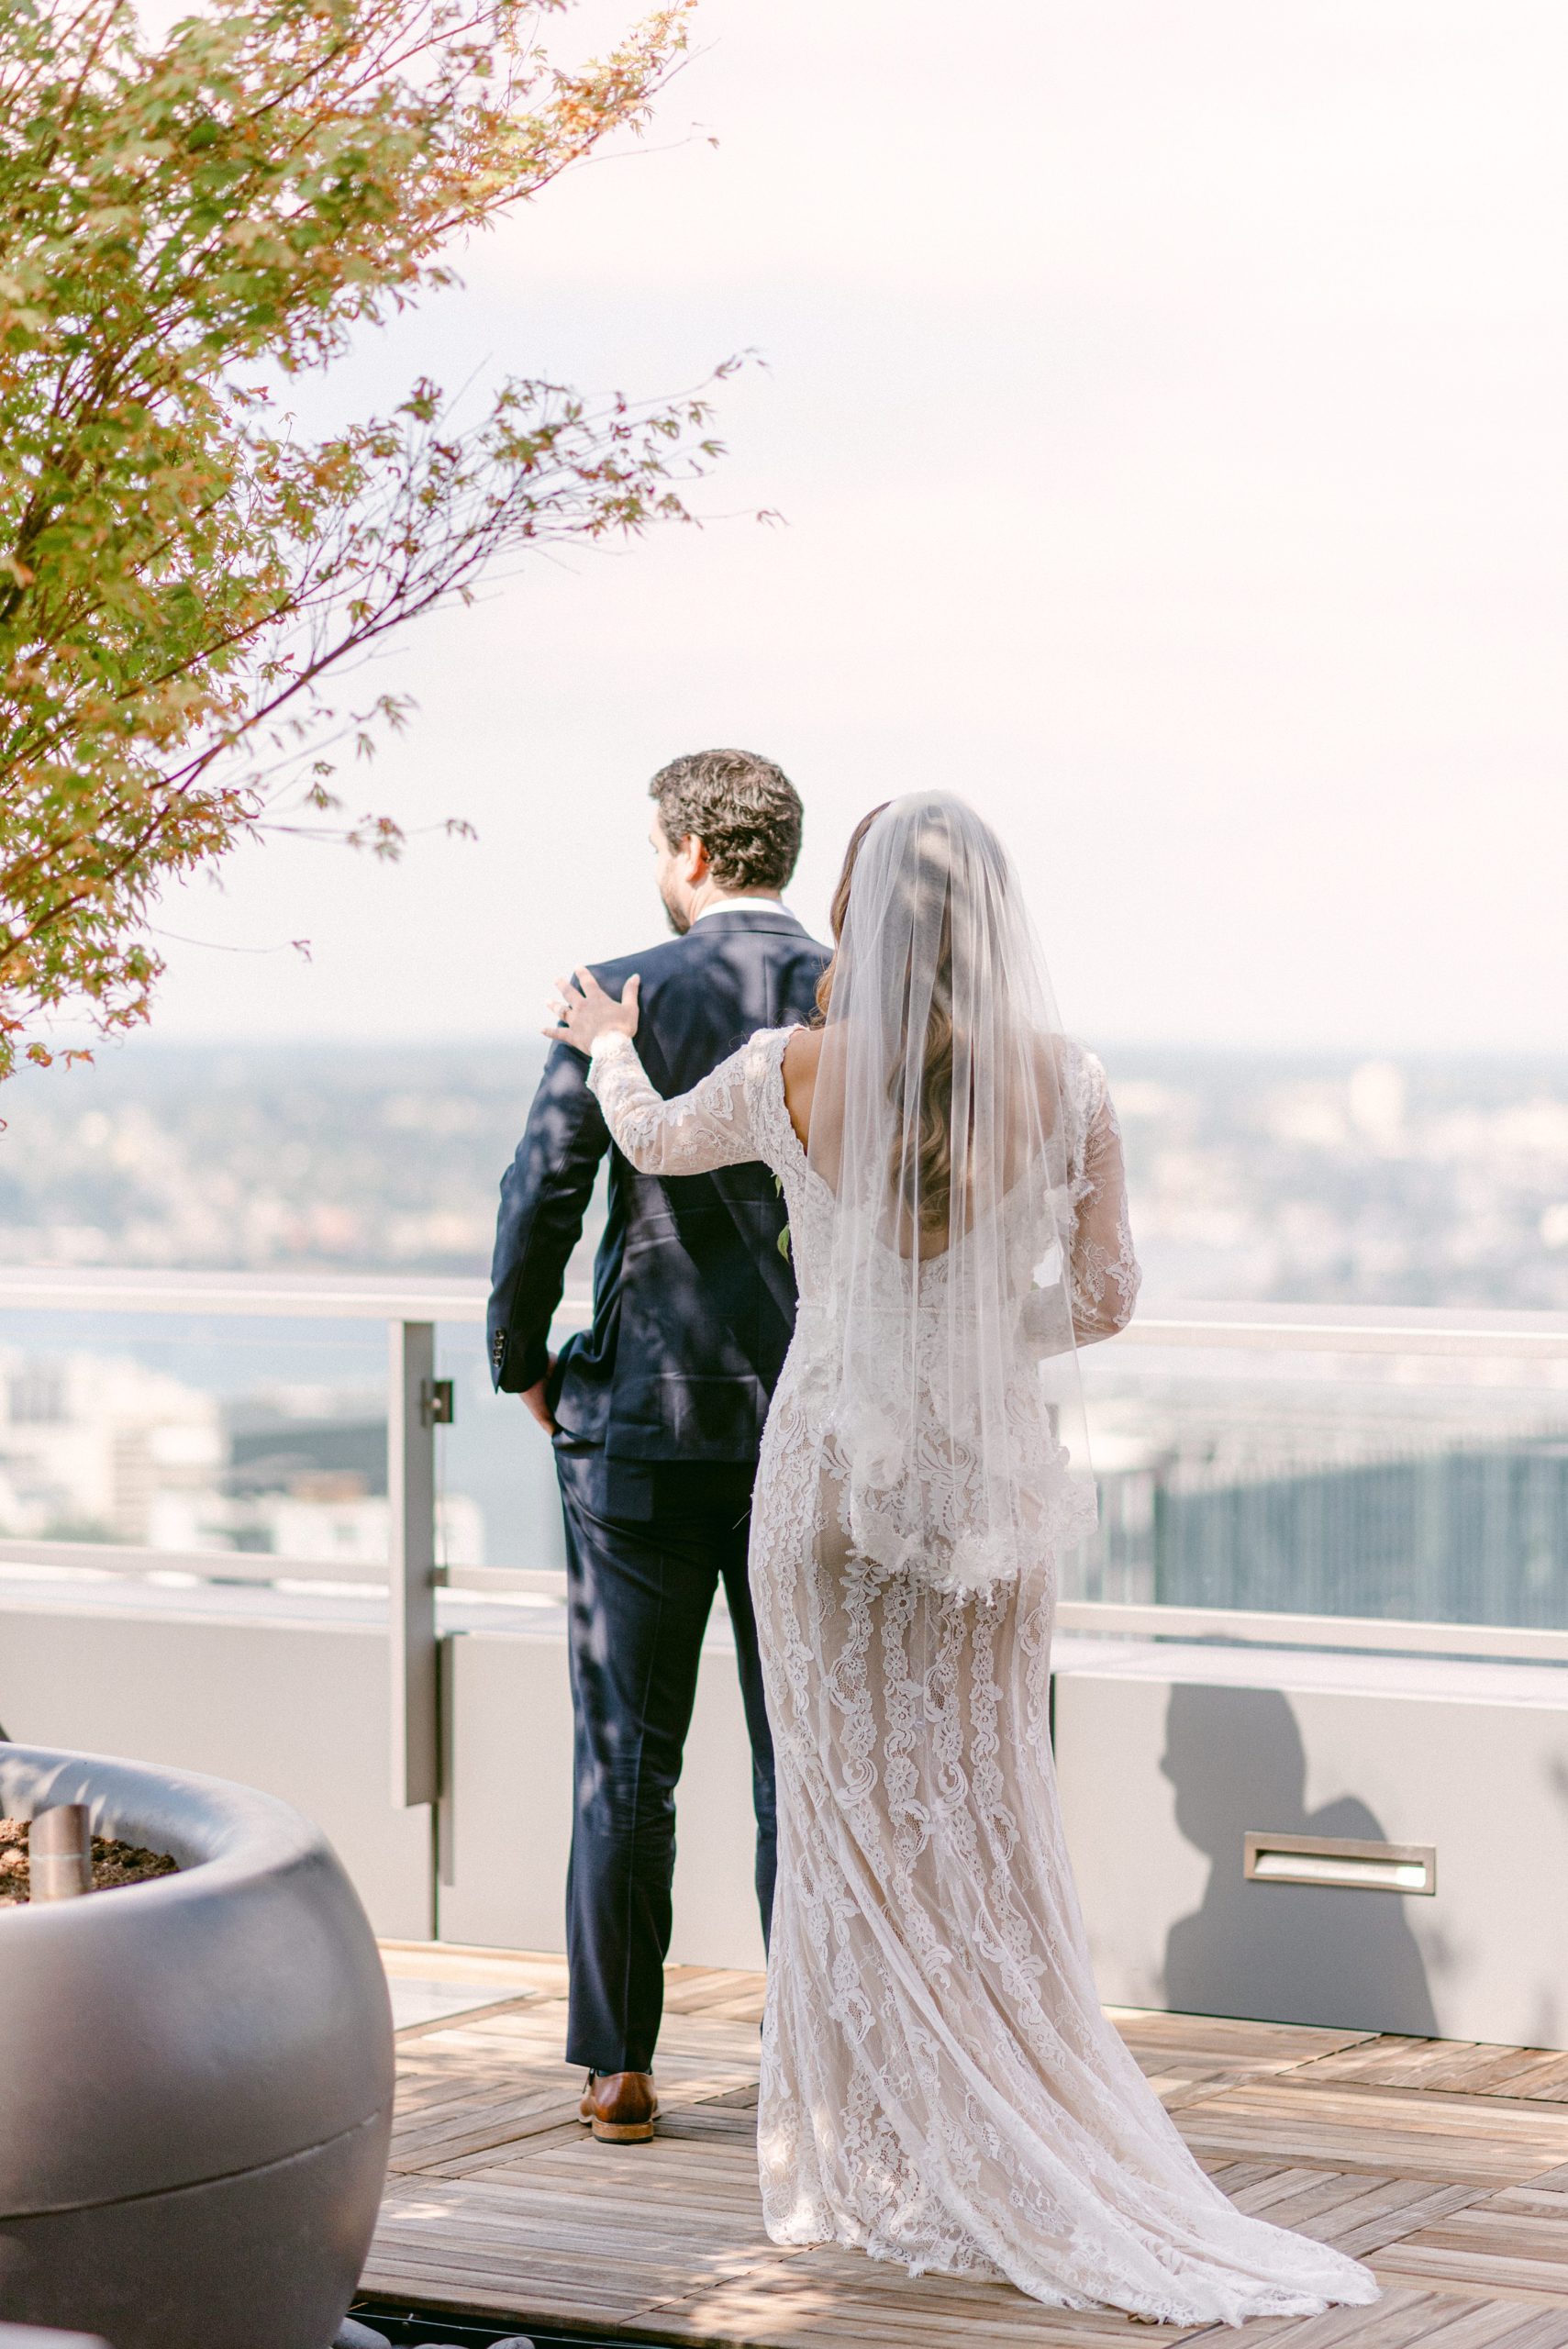 Seattle Washington, The Sound Hotel. First look with couple on their wedding day. Downtown Seattle in the Background. Bride reaching for her soon-to-be husband.